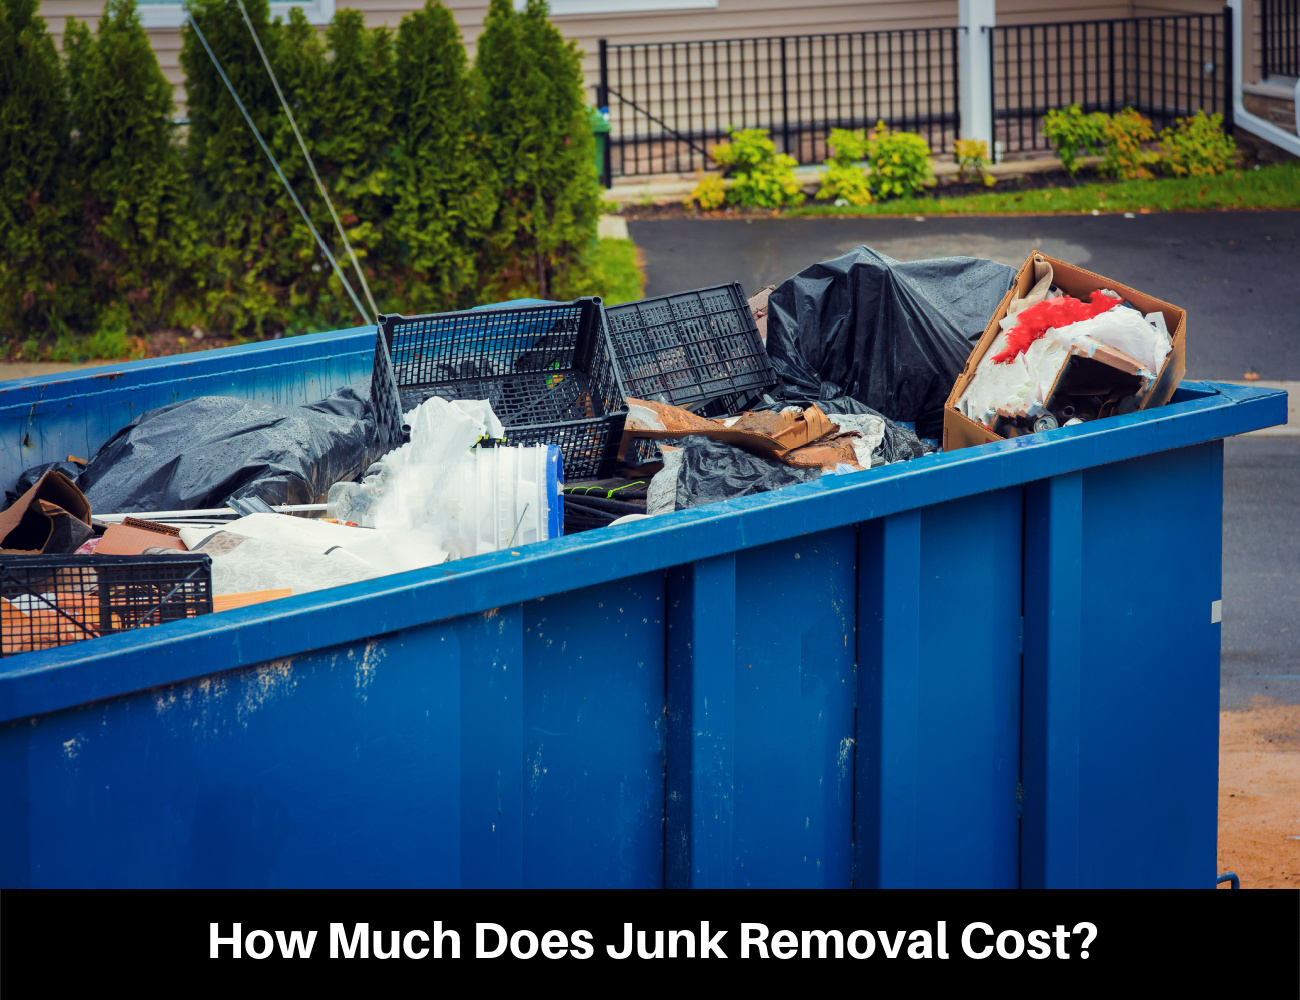 How Much Does Junk Removal Cost?